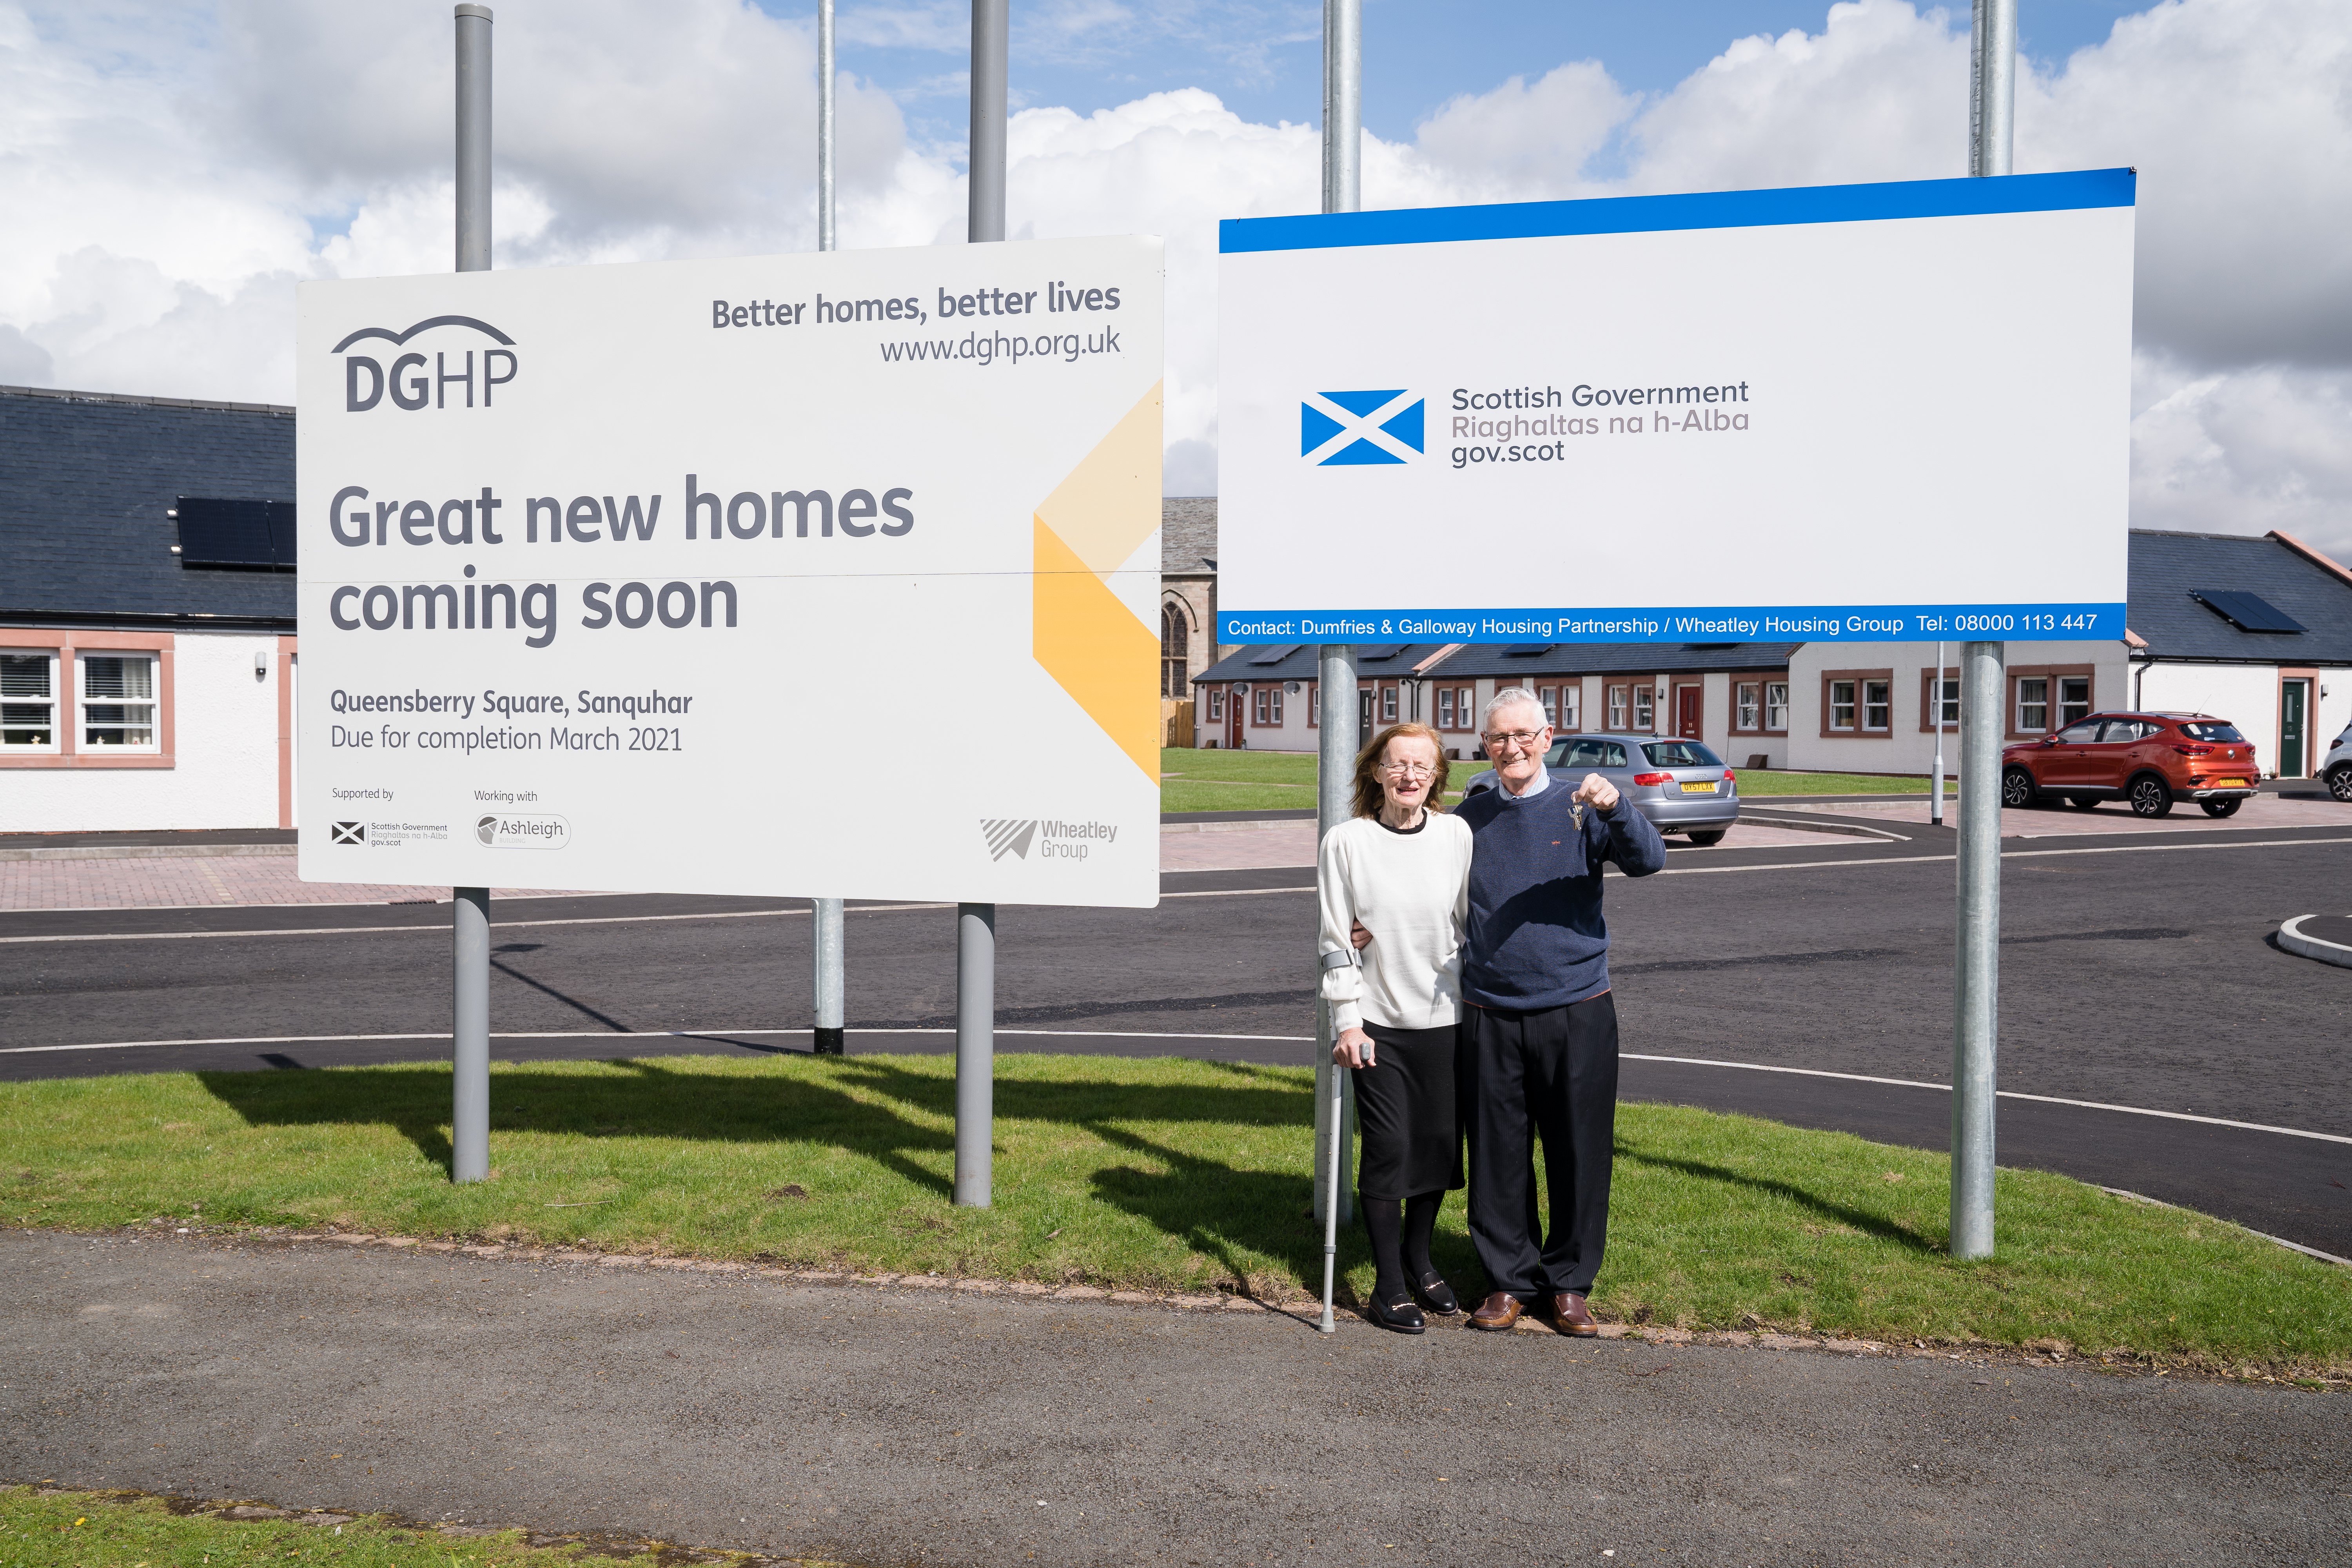 Sanquhar family become first tenants at new DGHP development